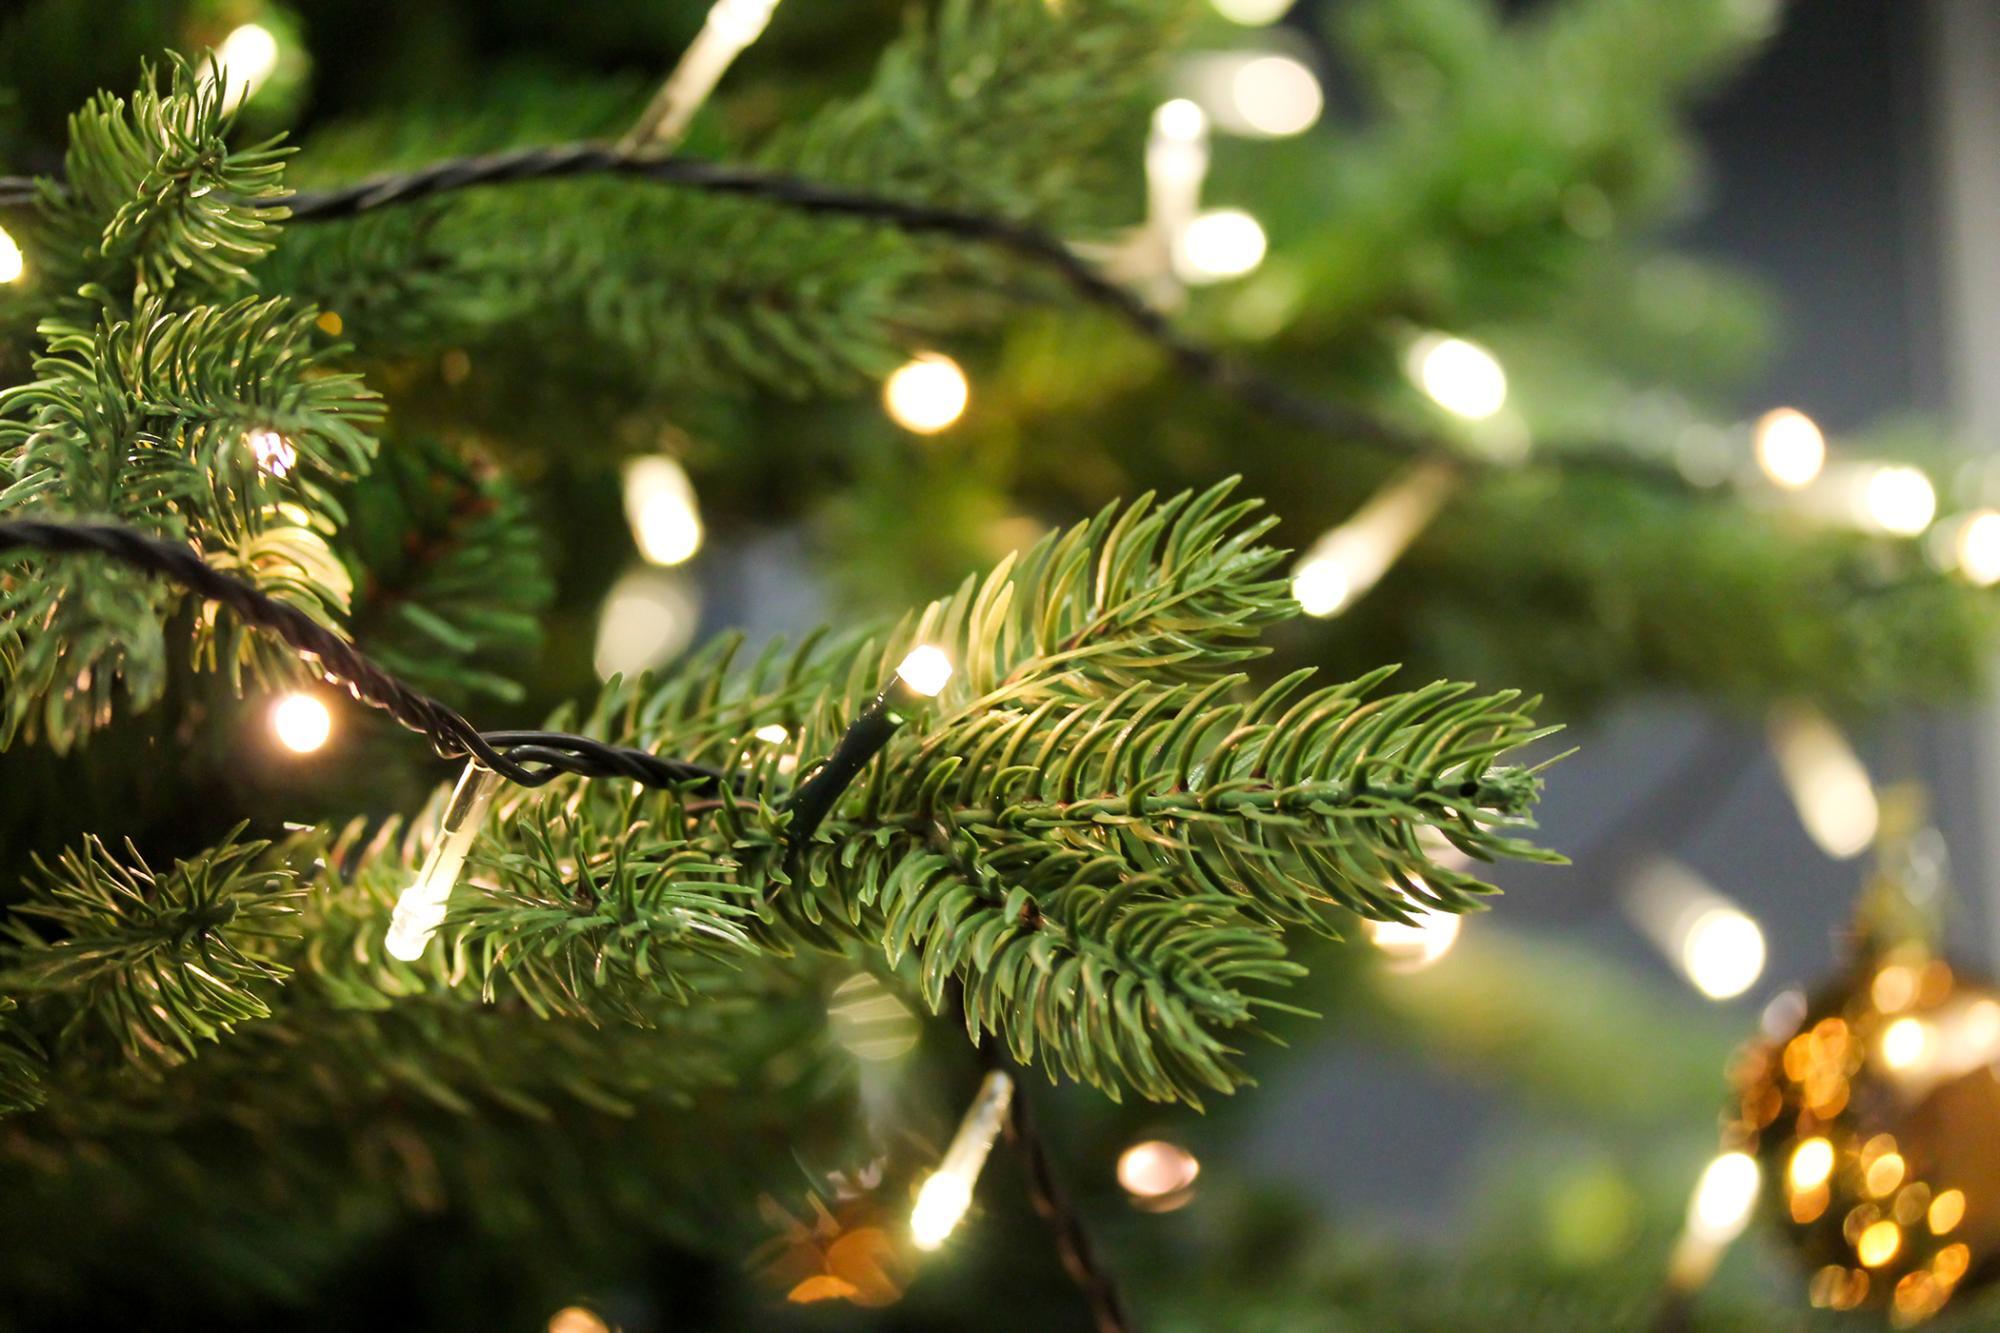 Close up of pine tree lit with small white lights